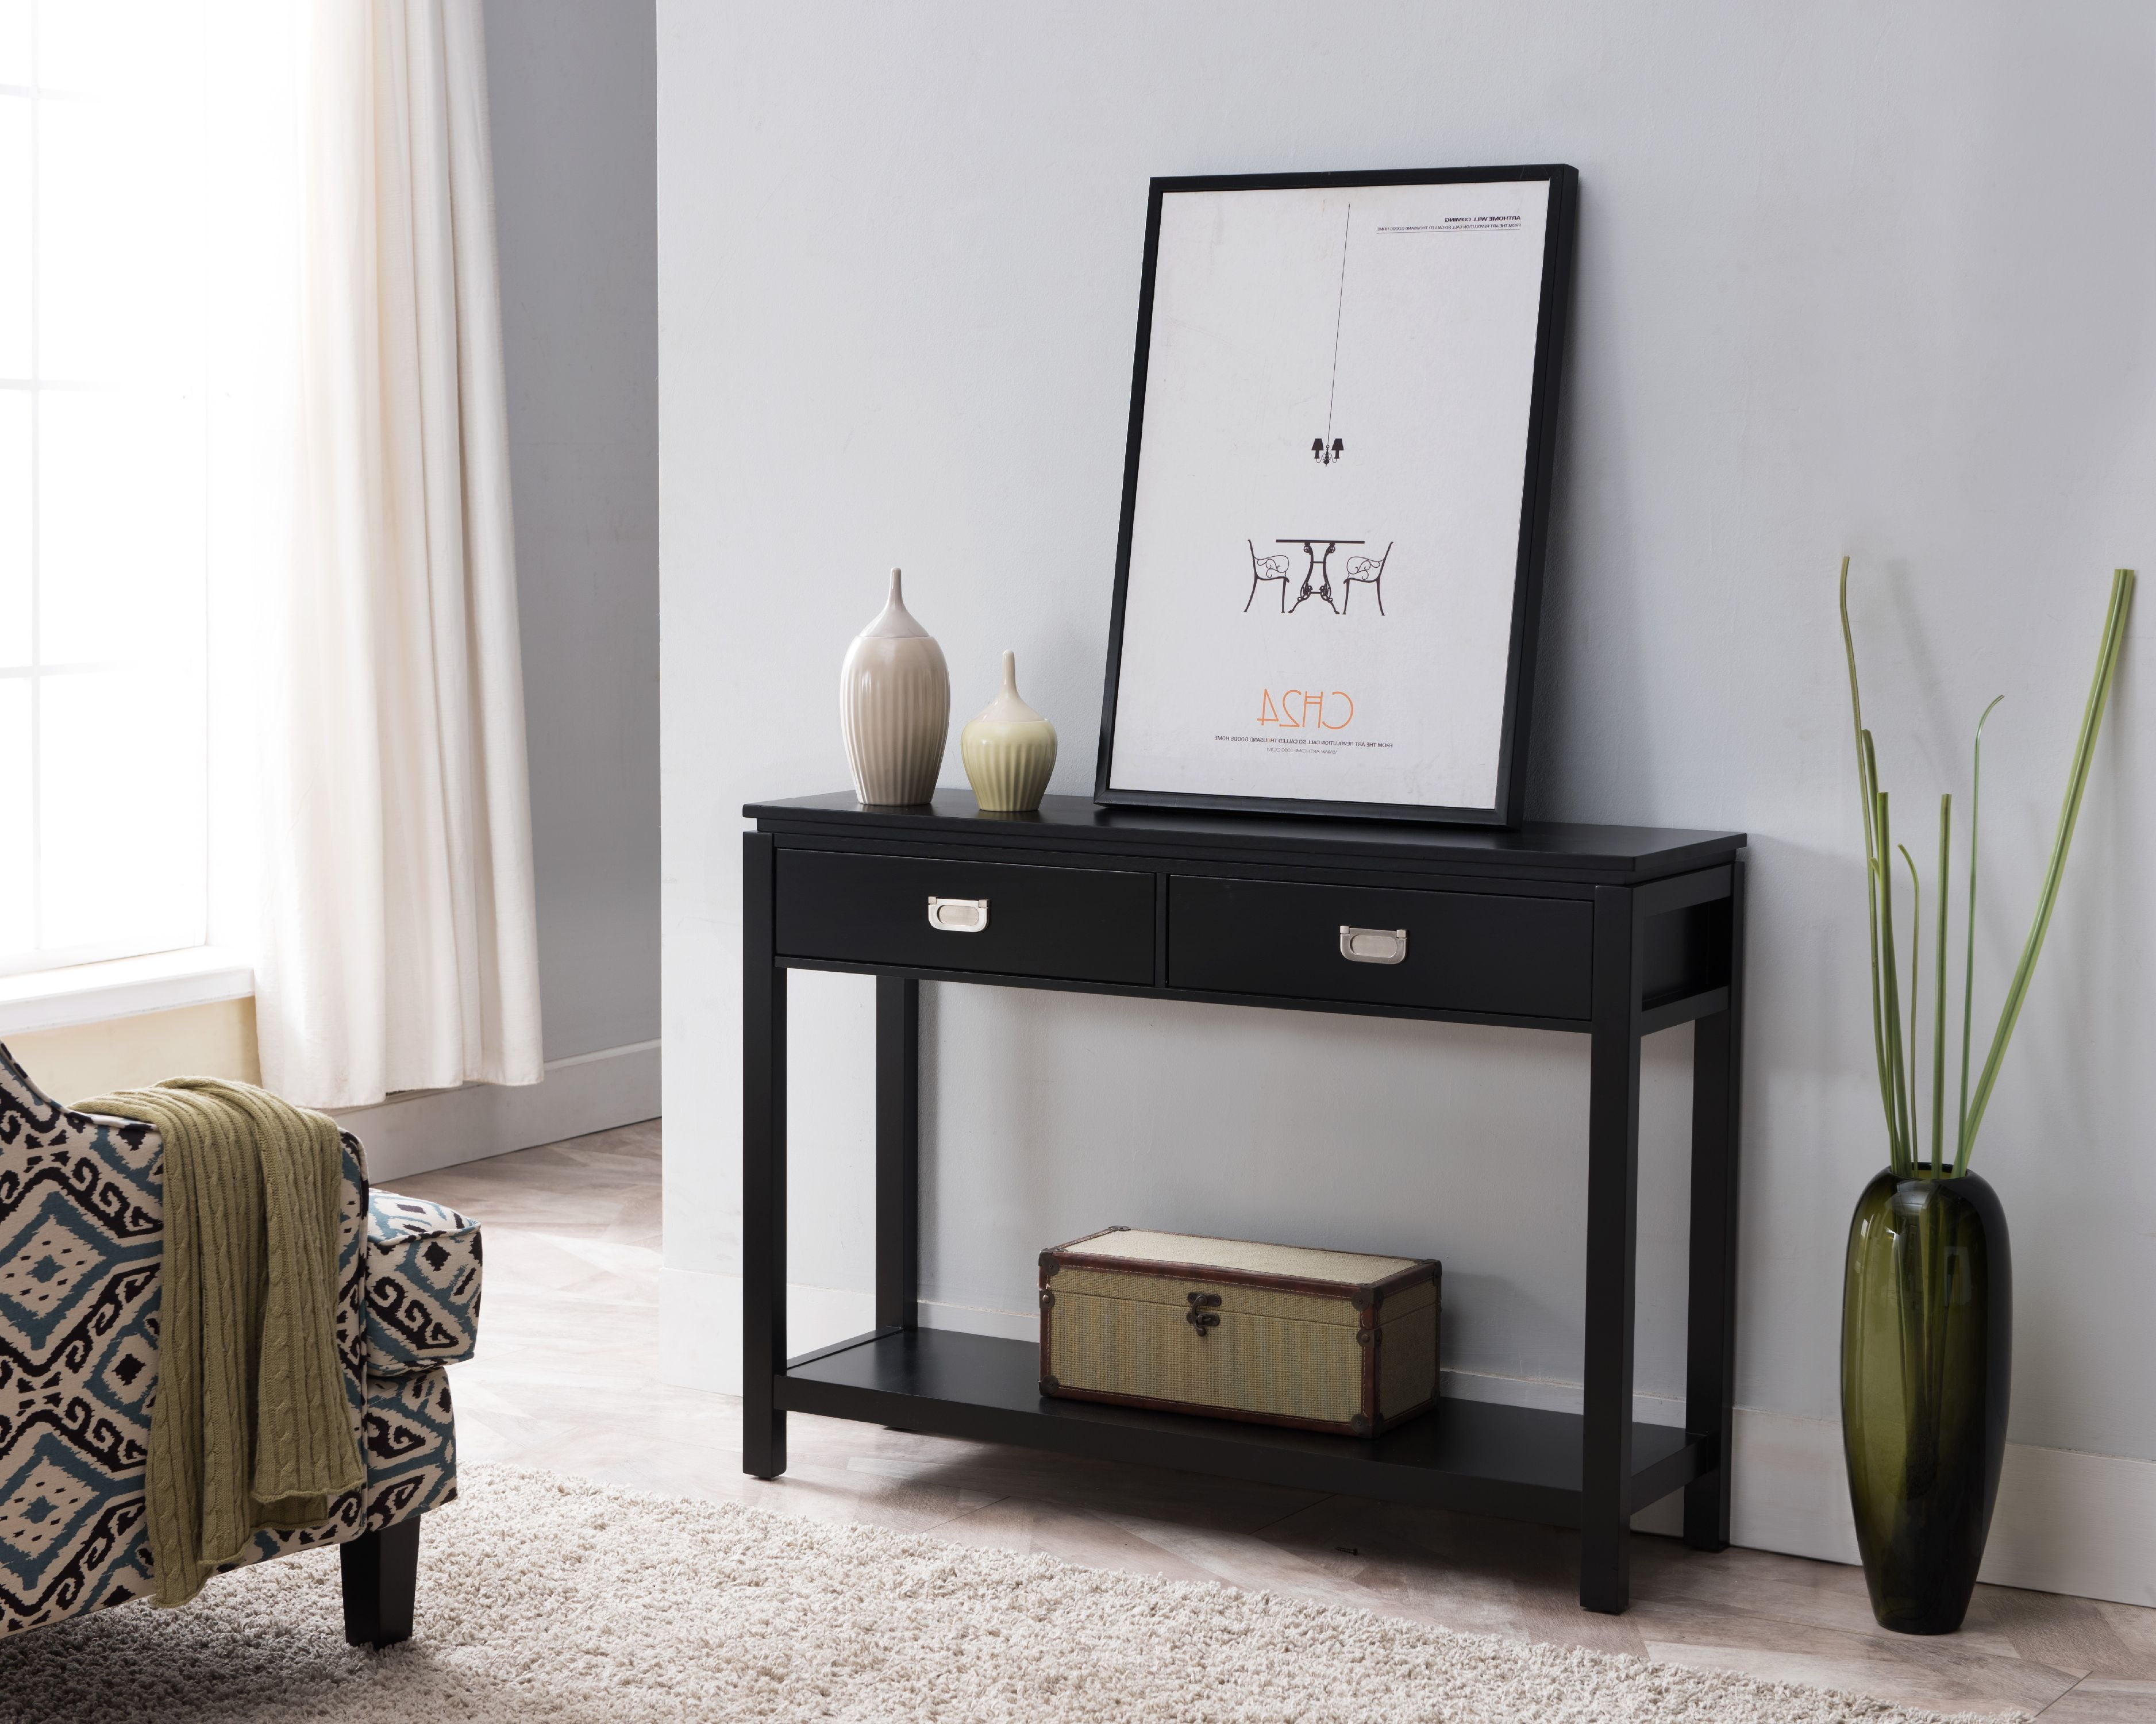 Dylan Black Wood Contemporary Entryway, Long Black Console Table With Drawers